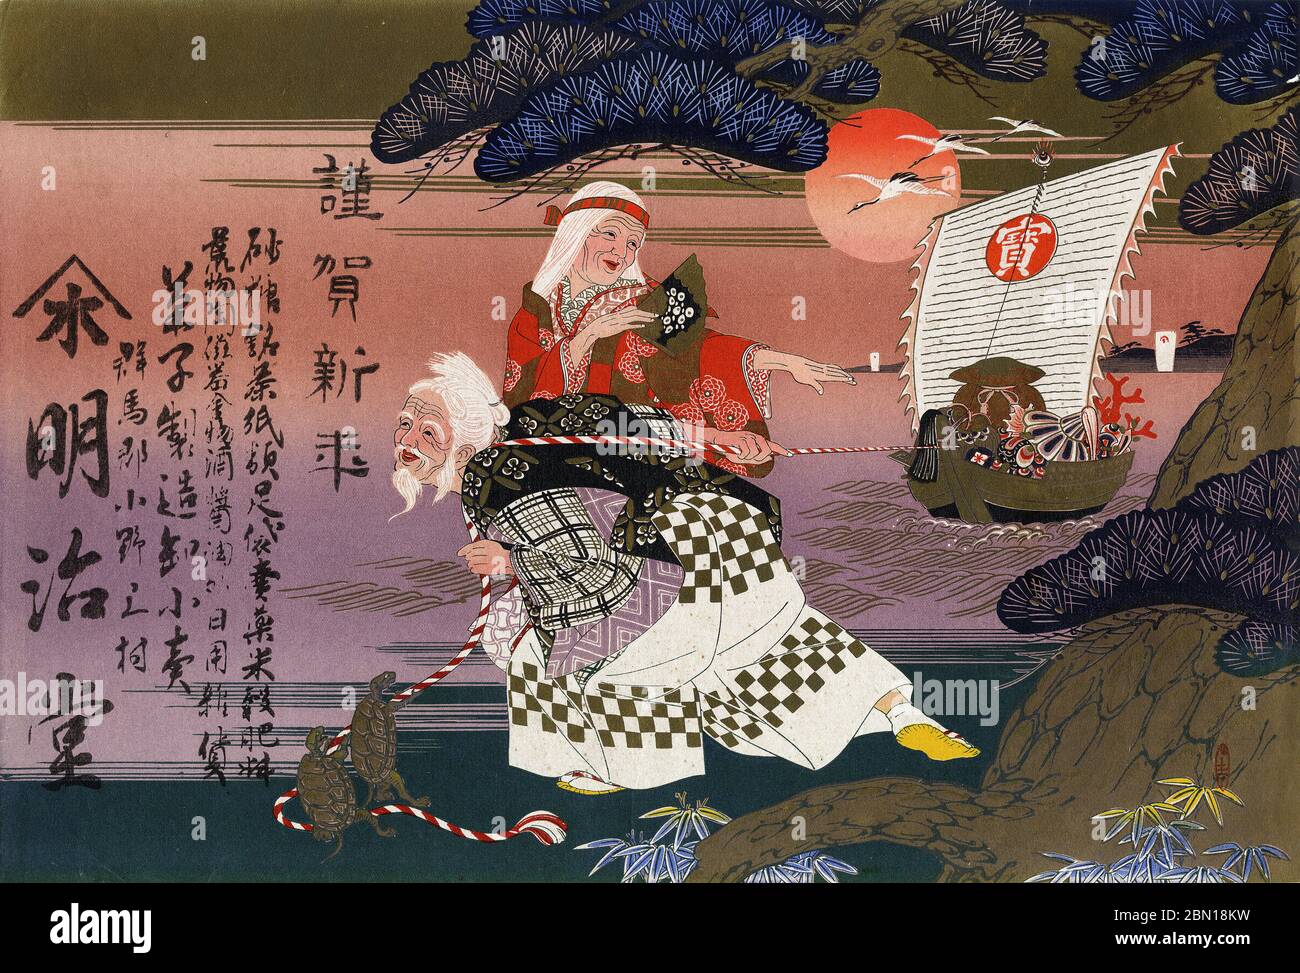 [ 1900s Japan - Old Man Pulling Boat ] —   Hikifuda (引札), a print used as an advertising flyer by local shops. They were popular from the 1800s through the 1920s.  This print shows an old man pulling a treasure boat with rope.  The writing gives New Year greetings and advertises the Meijido (明治堂) store in Onomae Village, Gunma Prefecture (群馬県群馬郡小野上村).  20th century vintage advertising flyer. Stock Photo